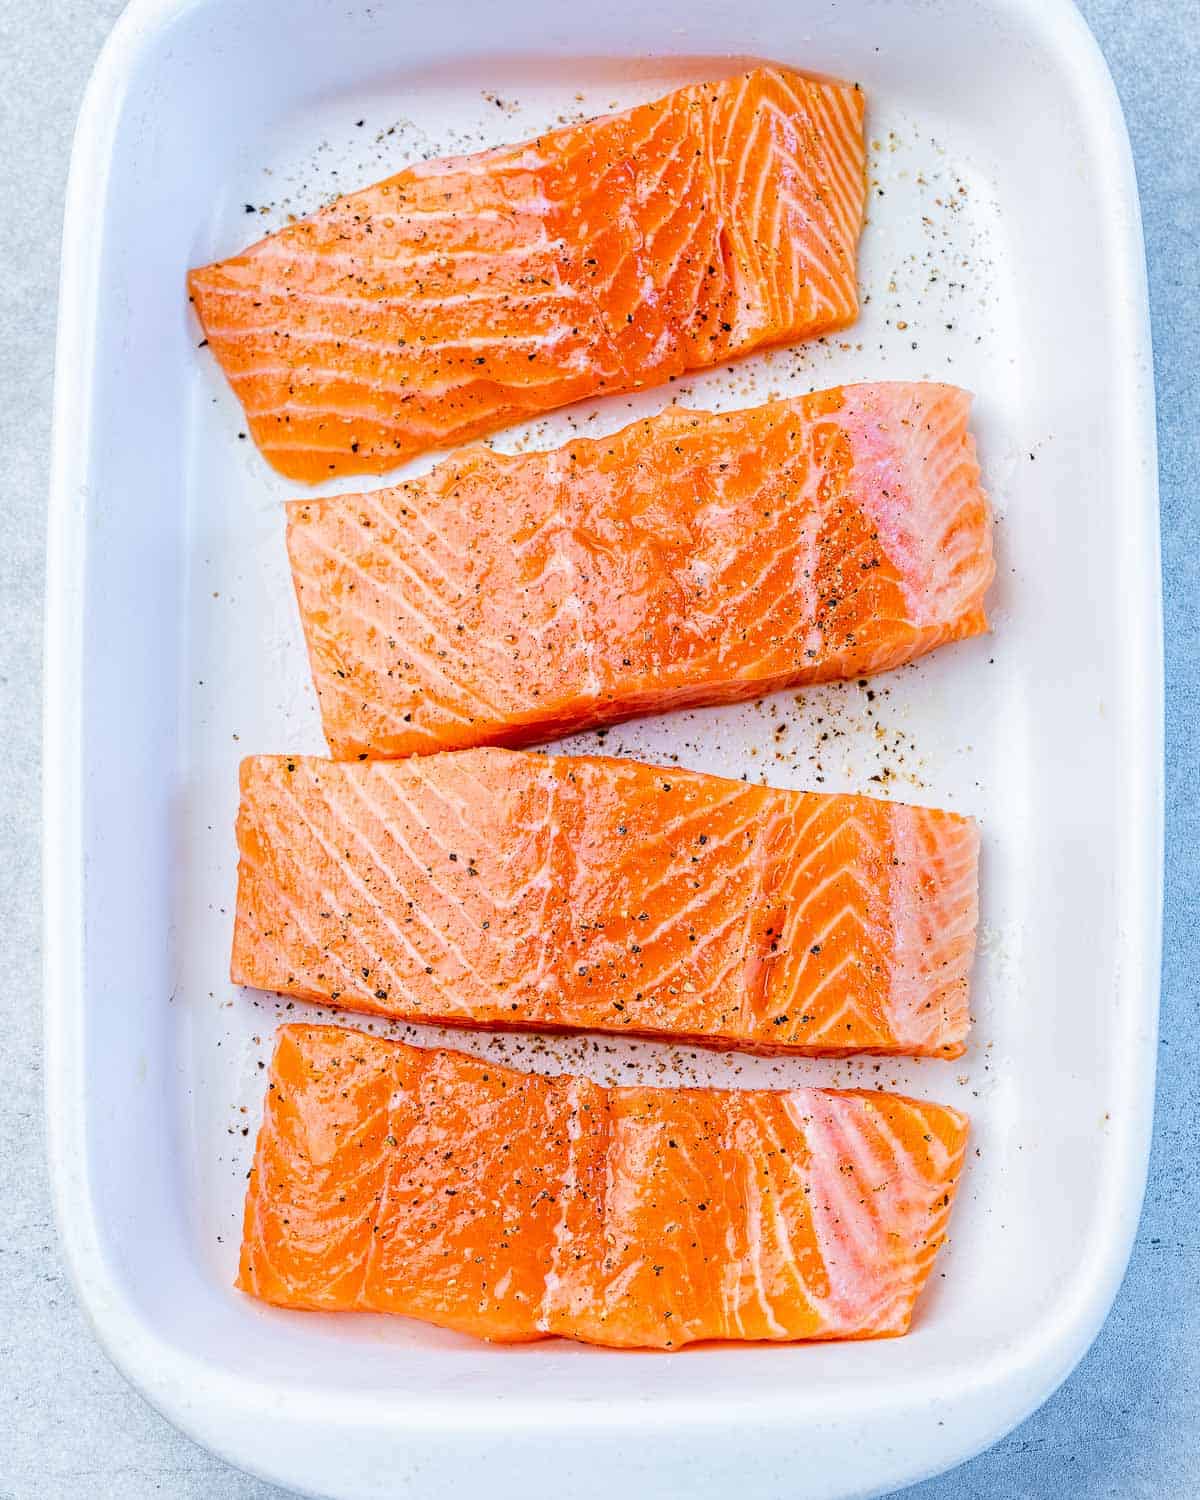 Raw salmon seasoned with salt and pepper.